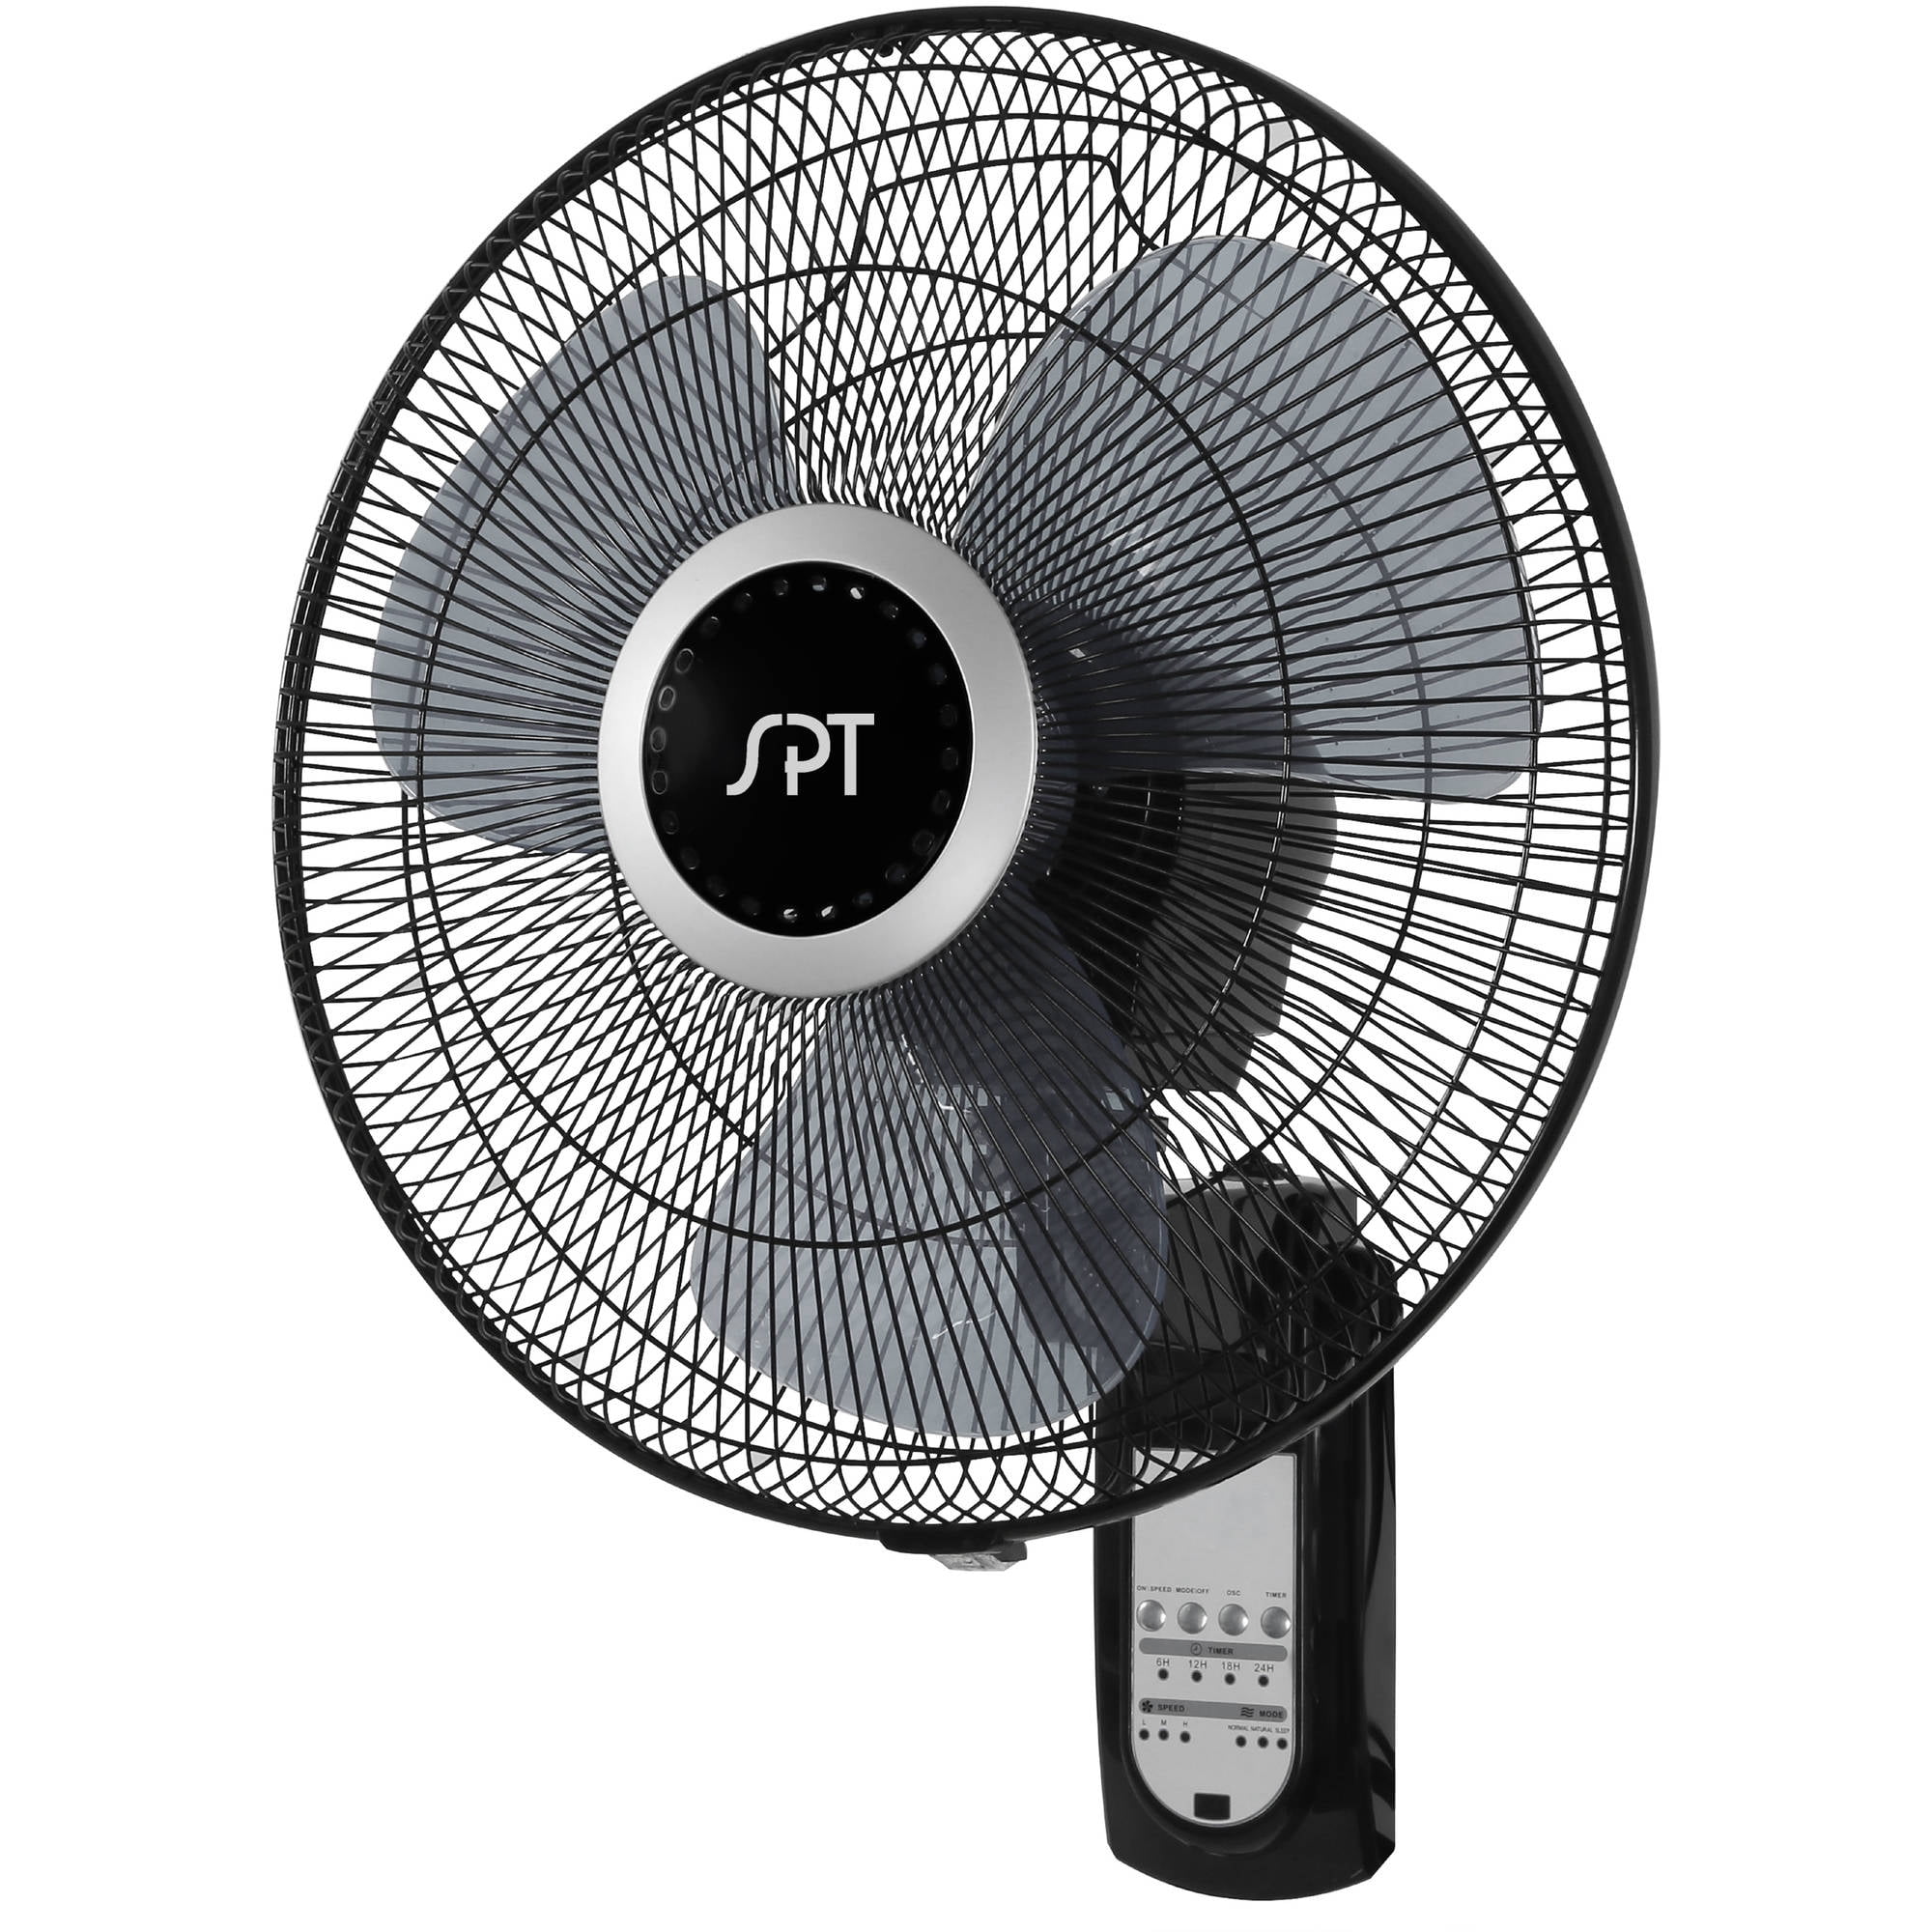 Spt Sf 16w81 16 Wall Mount Fan With Remote Control